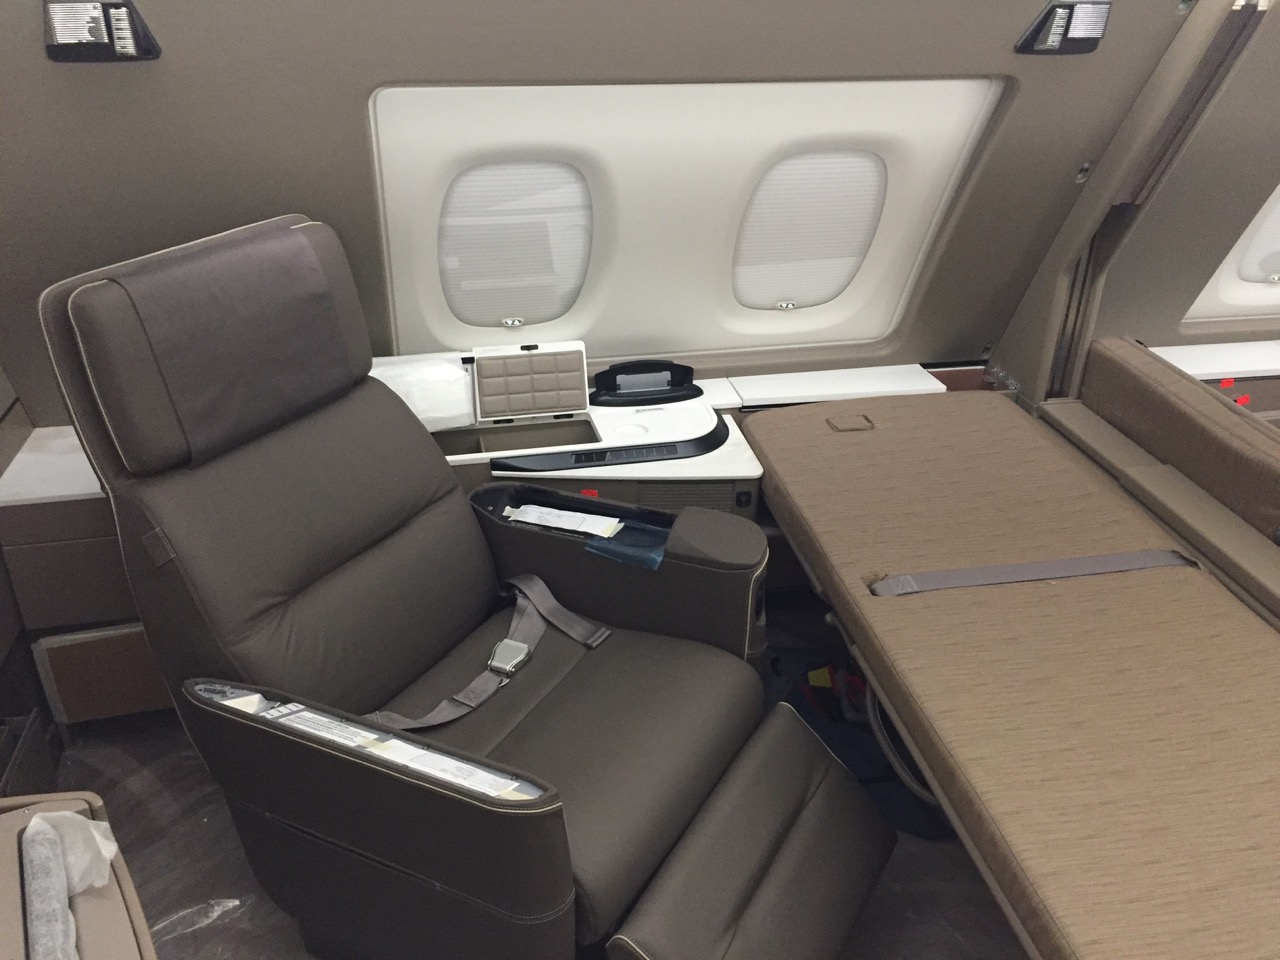 Singapore Airlines new A380 first class